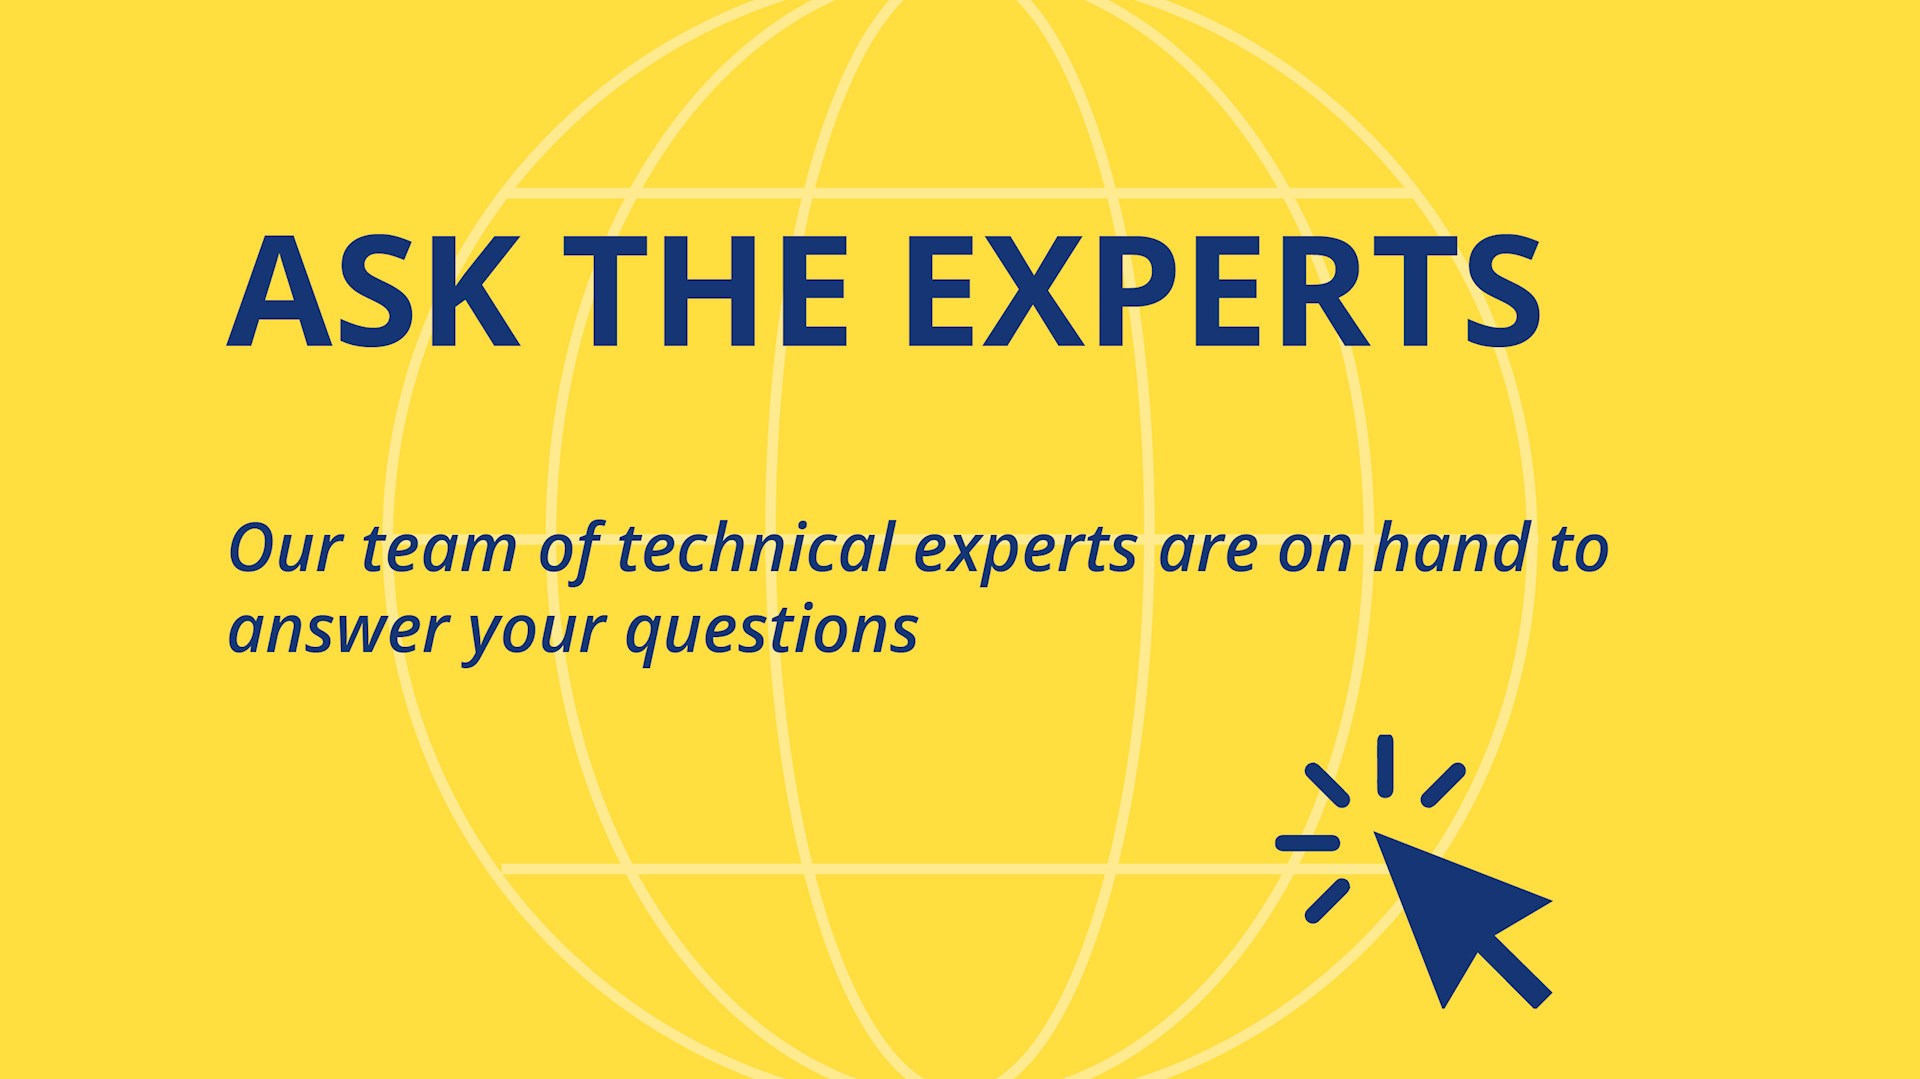 The Nickel Institute offers a free technical inquiry service to help you when using nickel - https://inquiries.nickelinstitute.org 